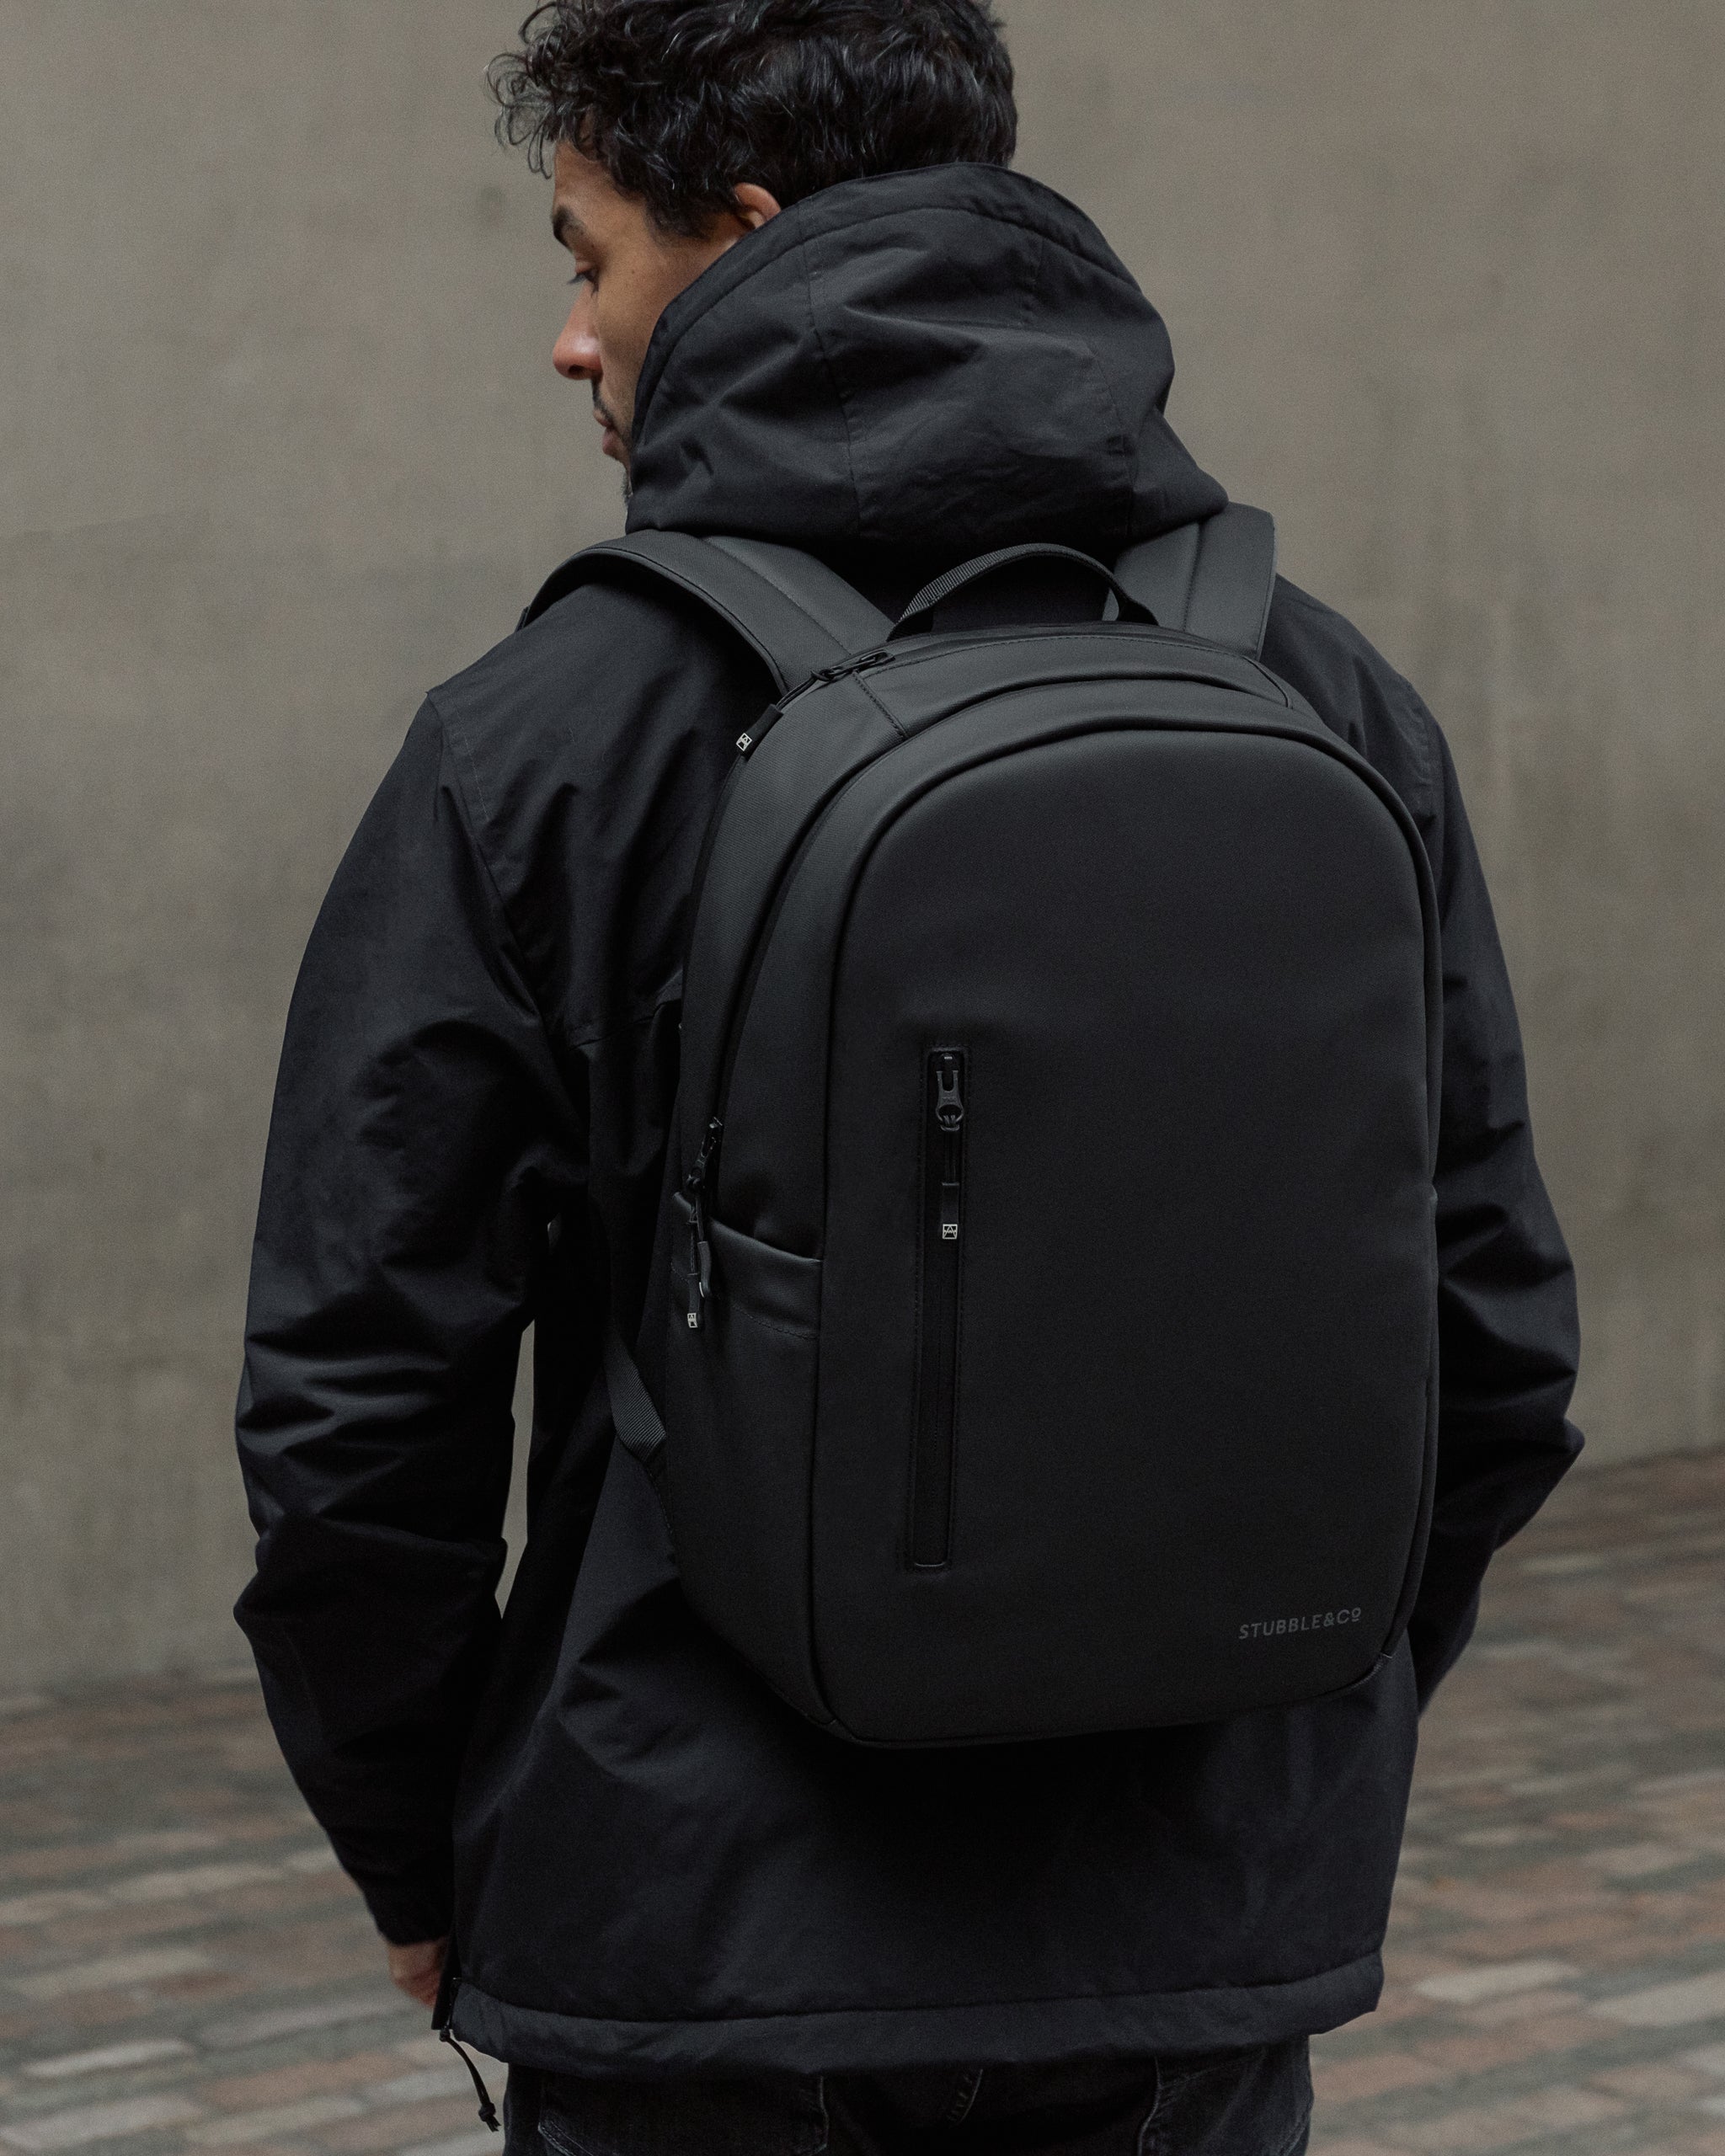 A man facing away wearing an all black everyday backpack on his back